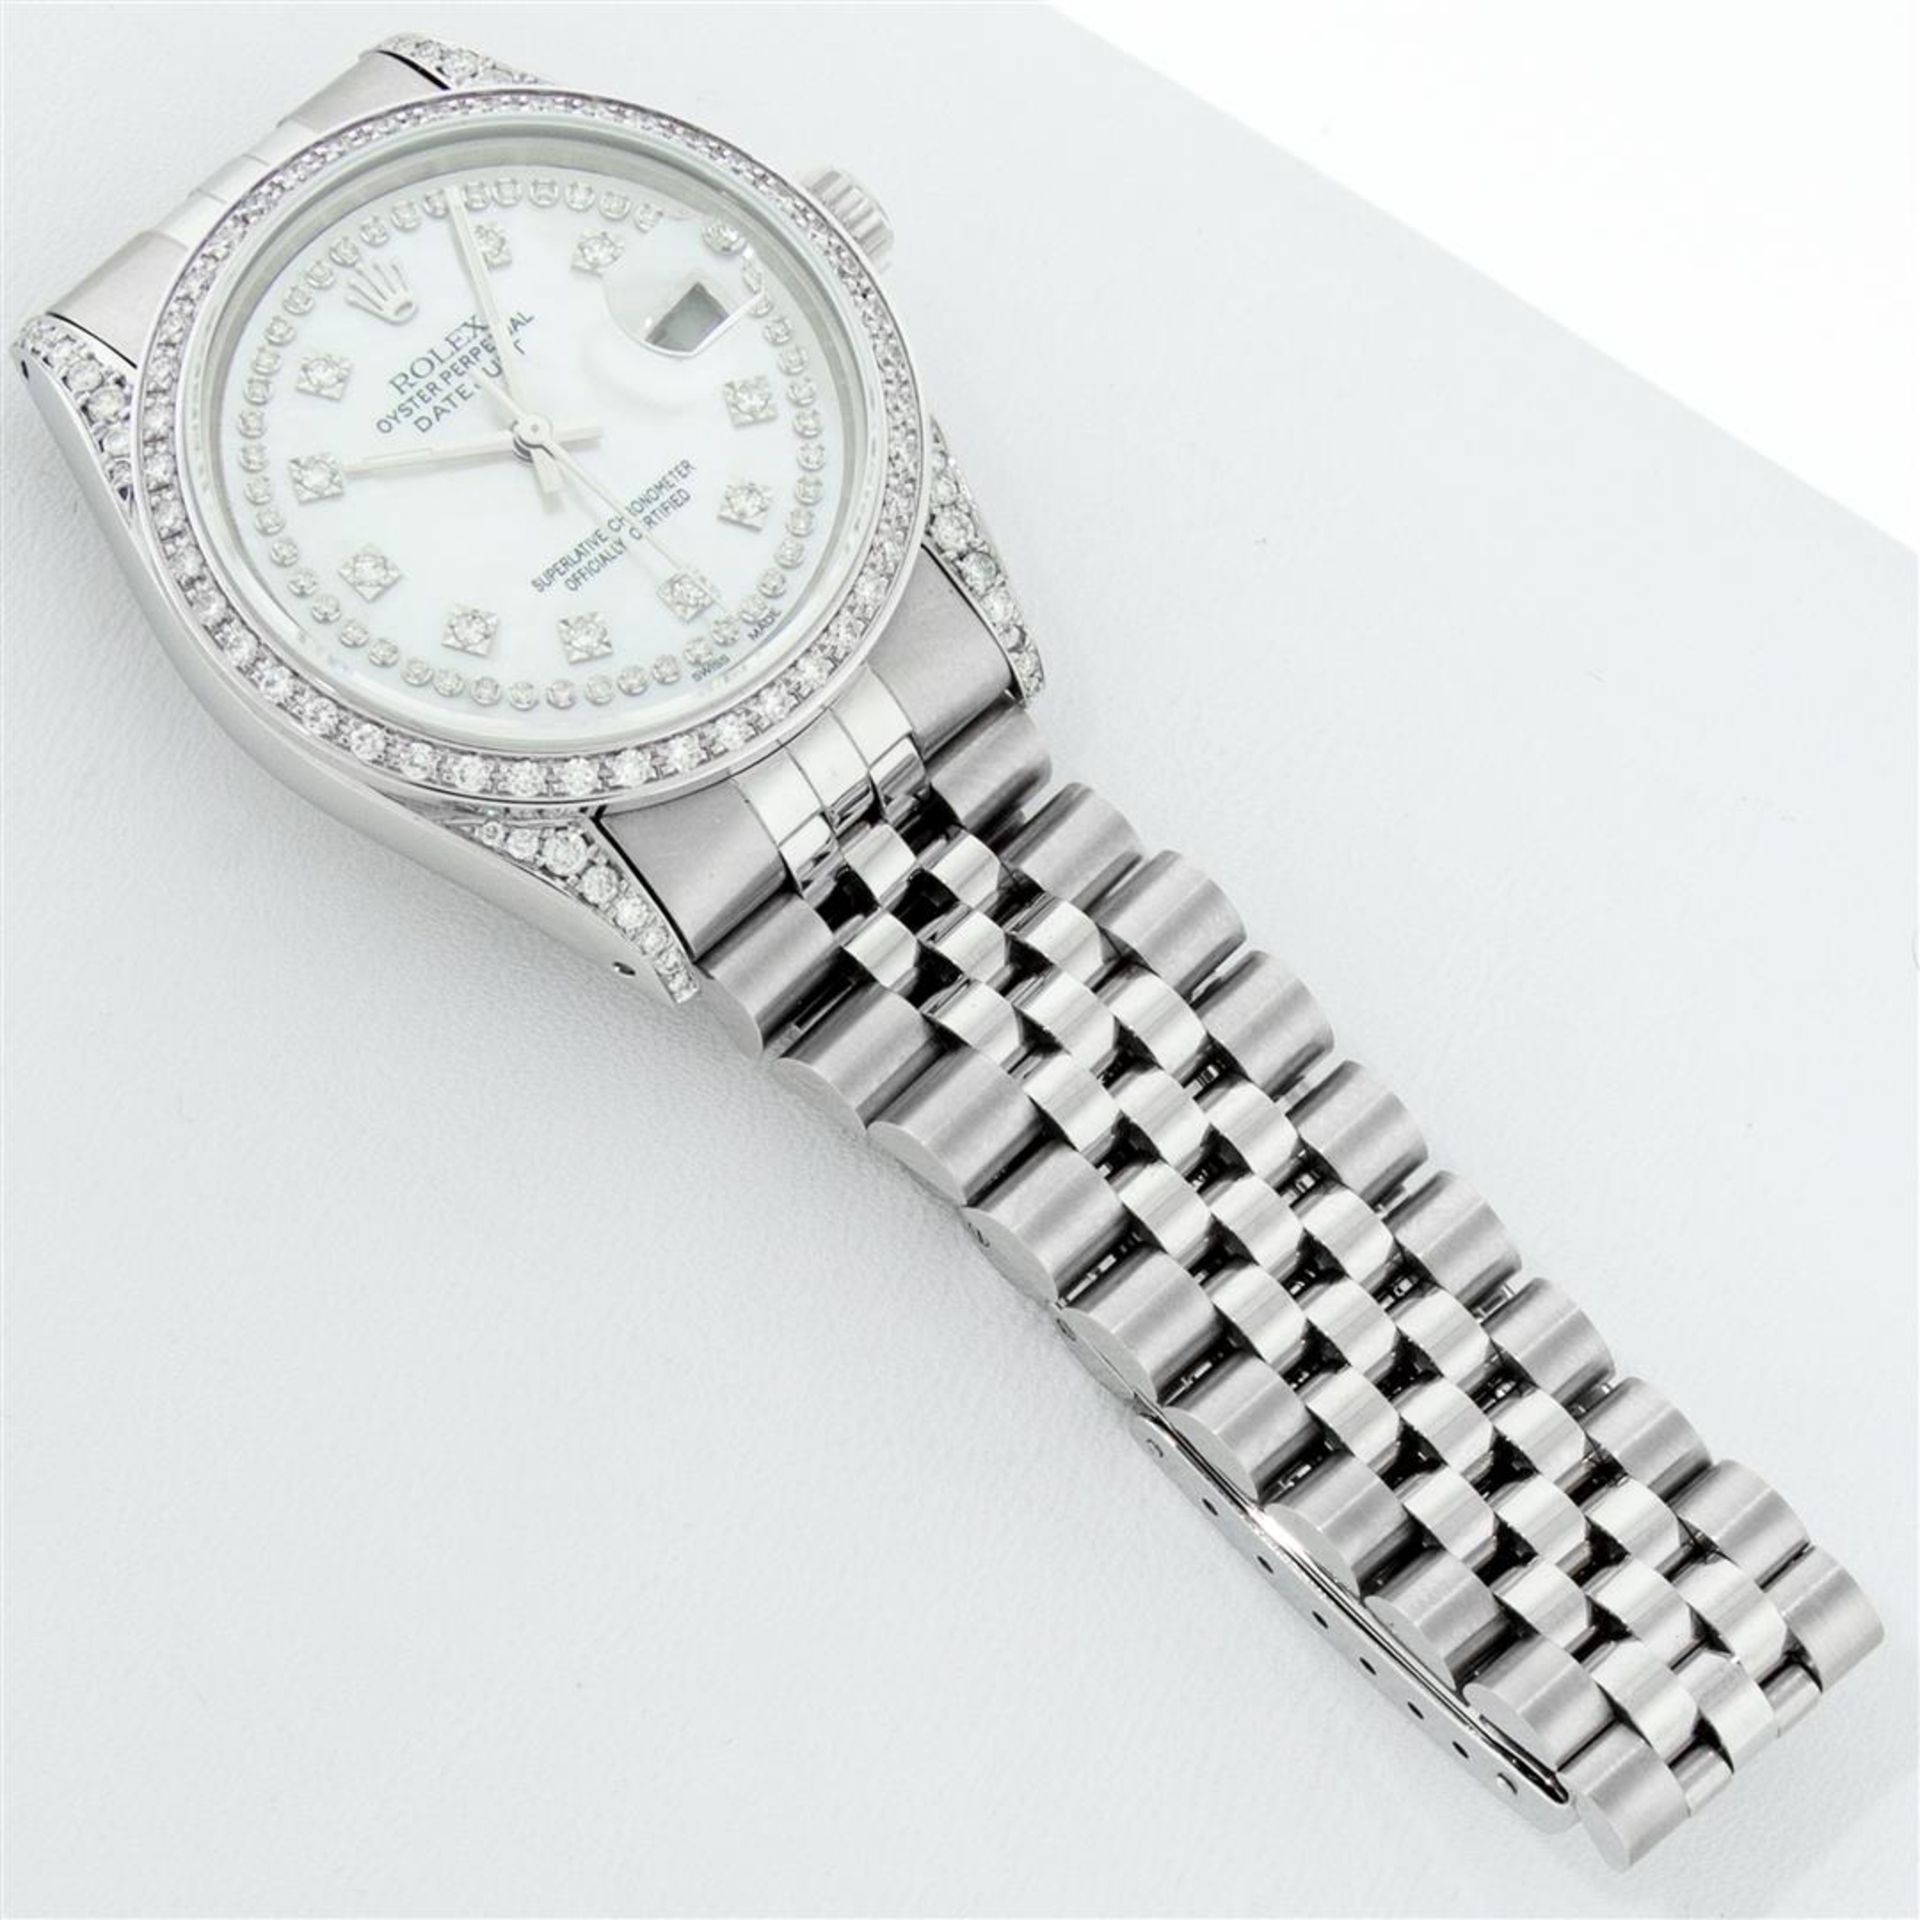 Rolex Mens Stainless Steel Mother Of Pearl Diamond Lugs Datejust Wristwatch - Image 7 of 9